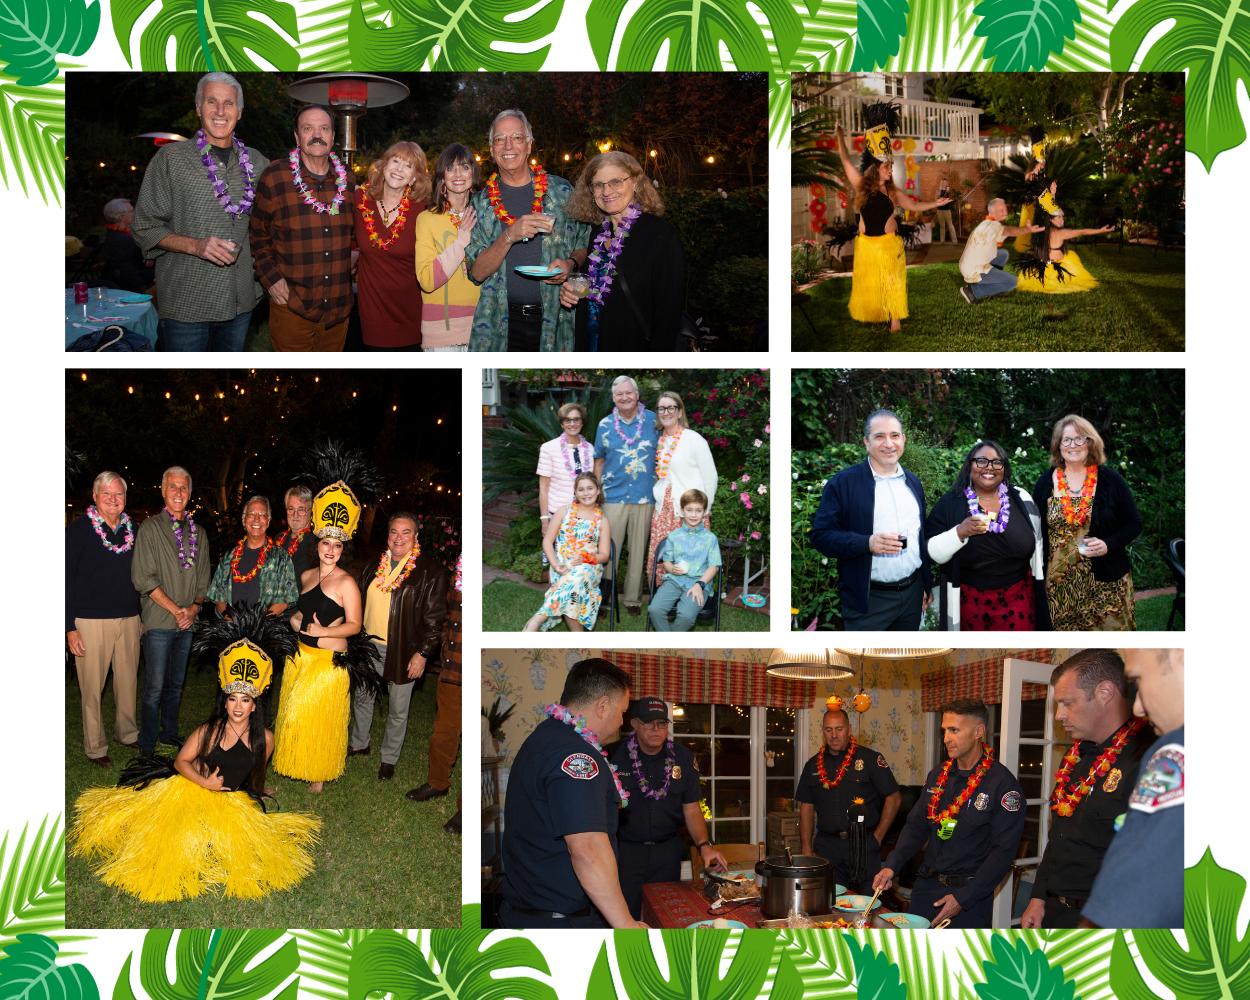 Guests with flowers around their necks at Hawaiian Luau, Fire Captain Welch dancing with Hawaiian dancers in yellow regalia, Hawaiian dancers posing with guests, the Hinckley family of hosts with their grandkids, Guests with tropical drinks in hand, Firefighters serving food inside the house.